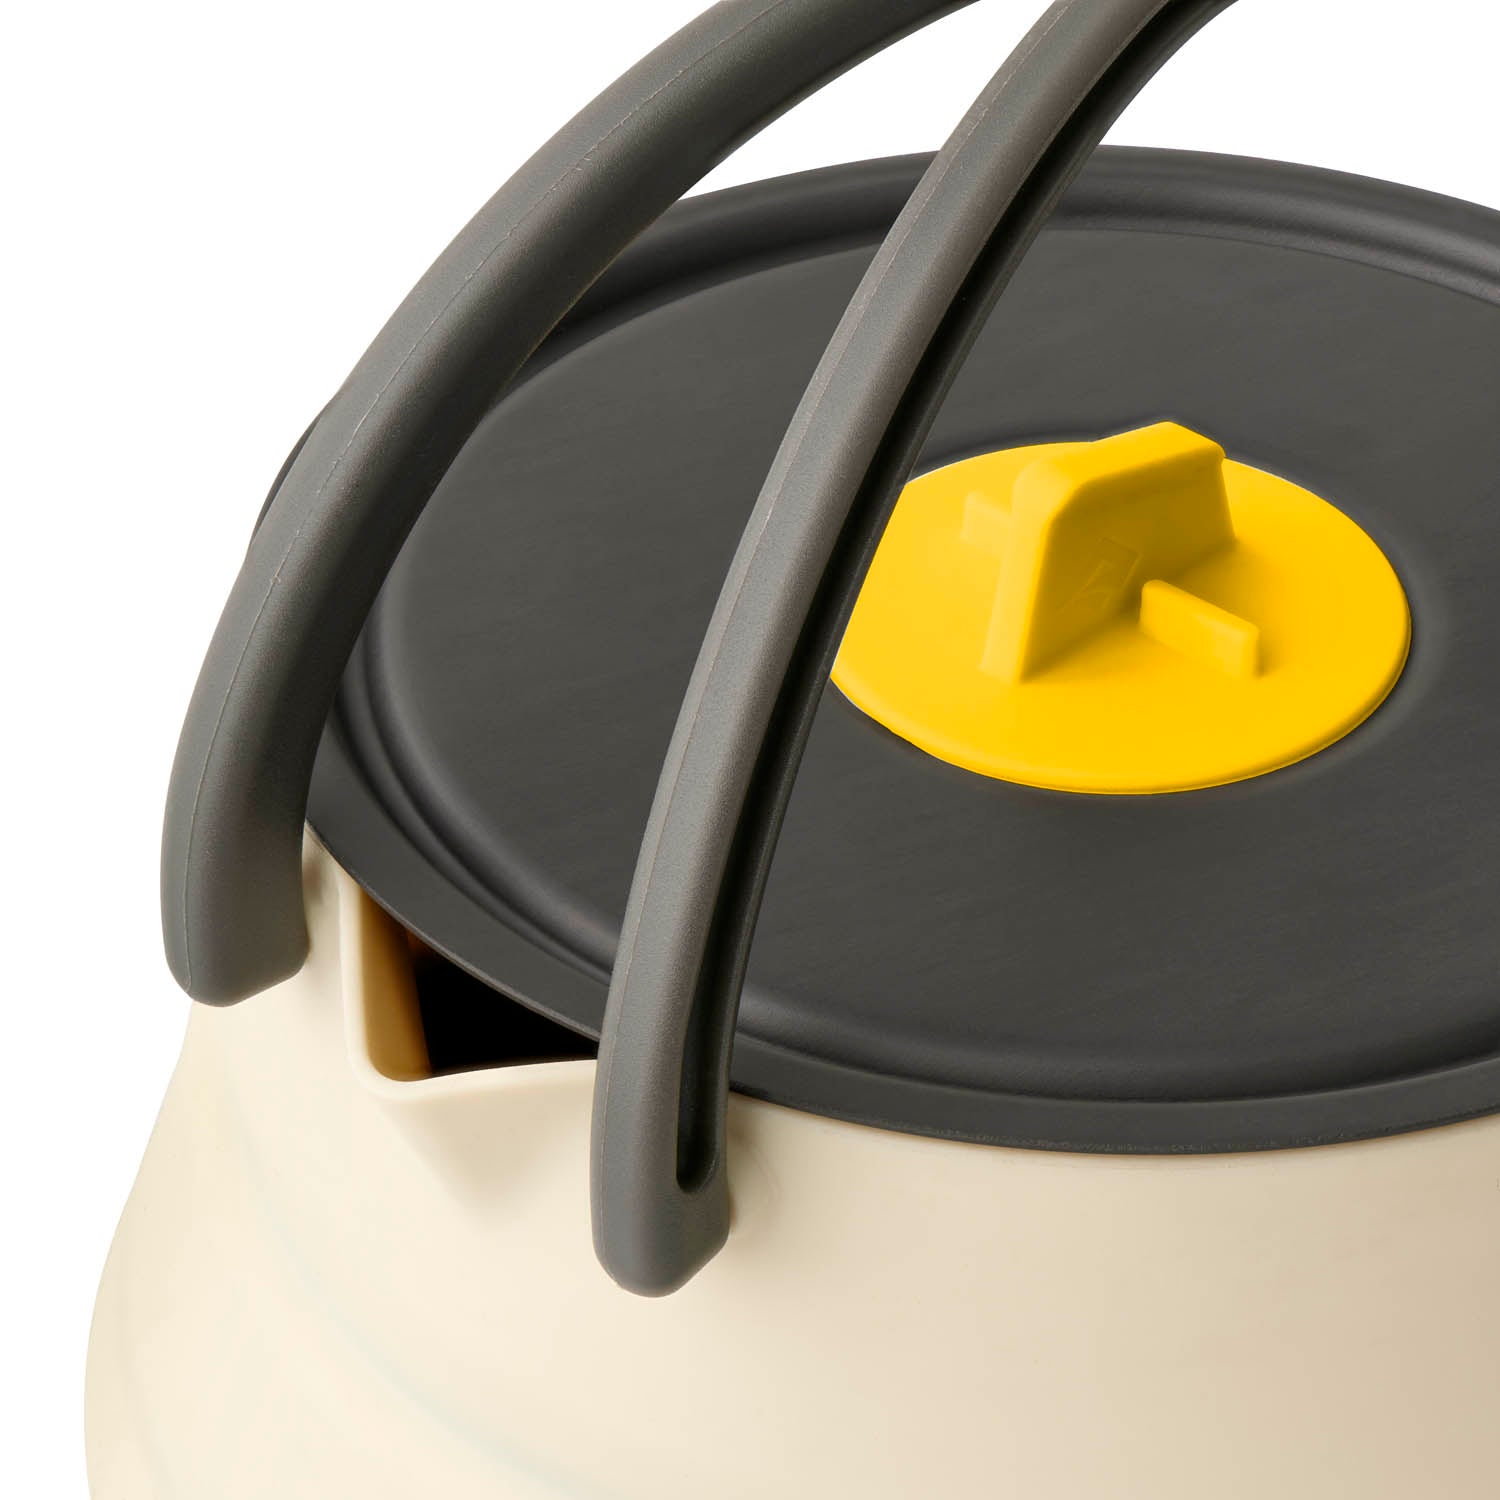 Frontier Ultralight Collapsible Kettle